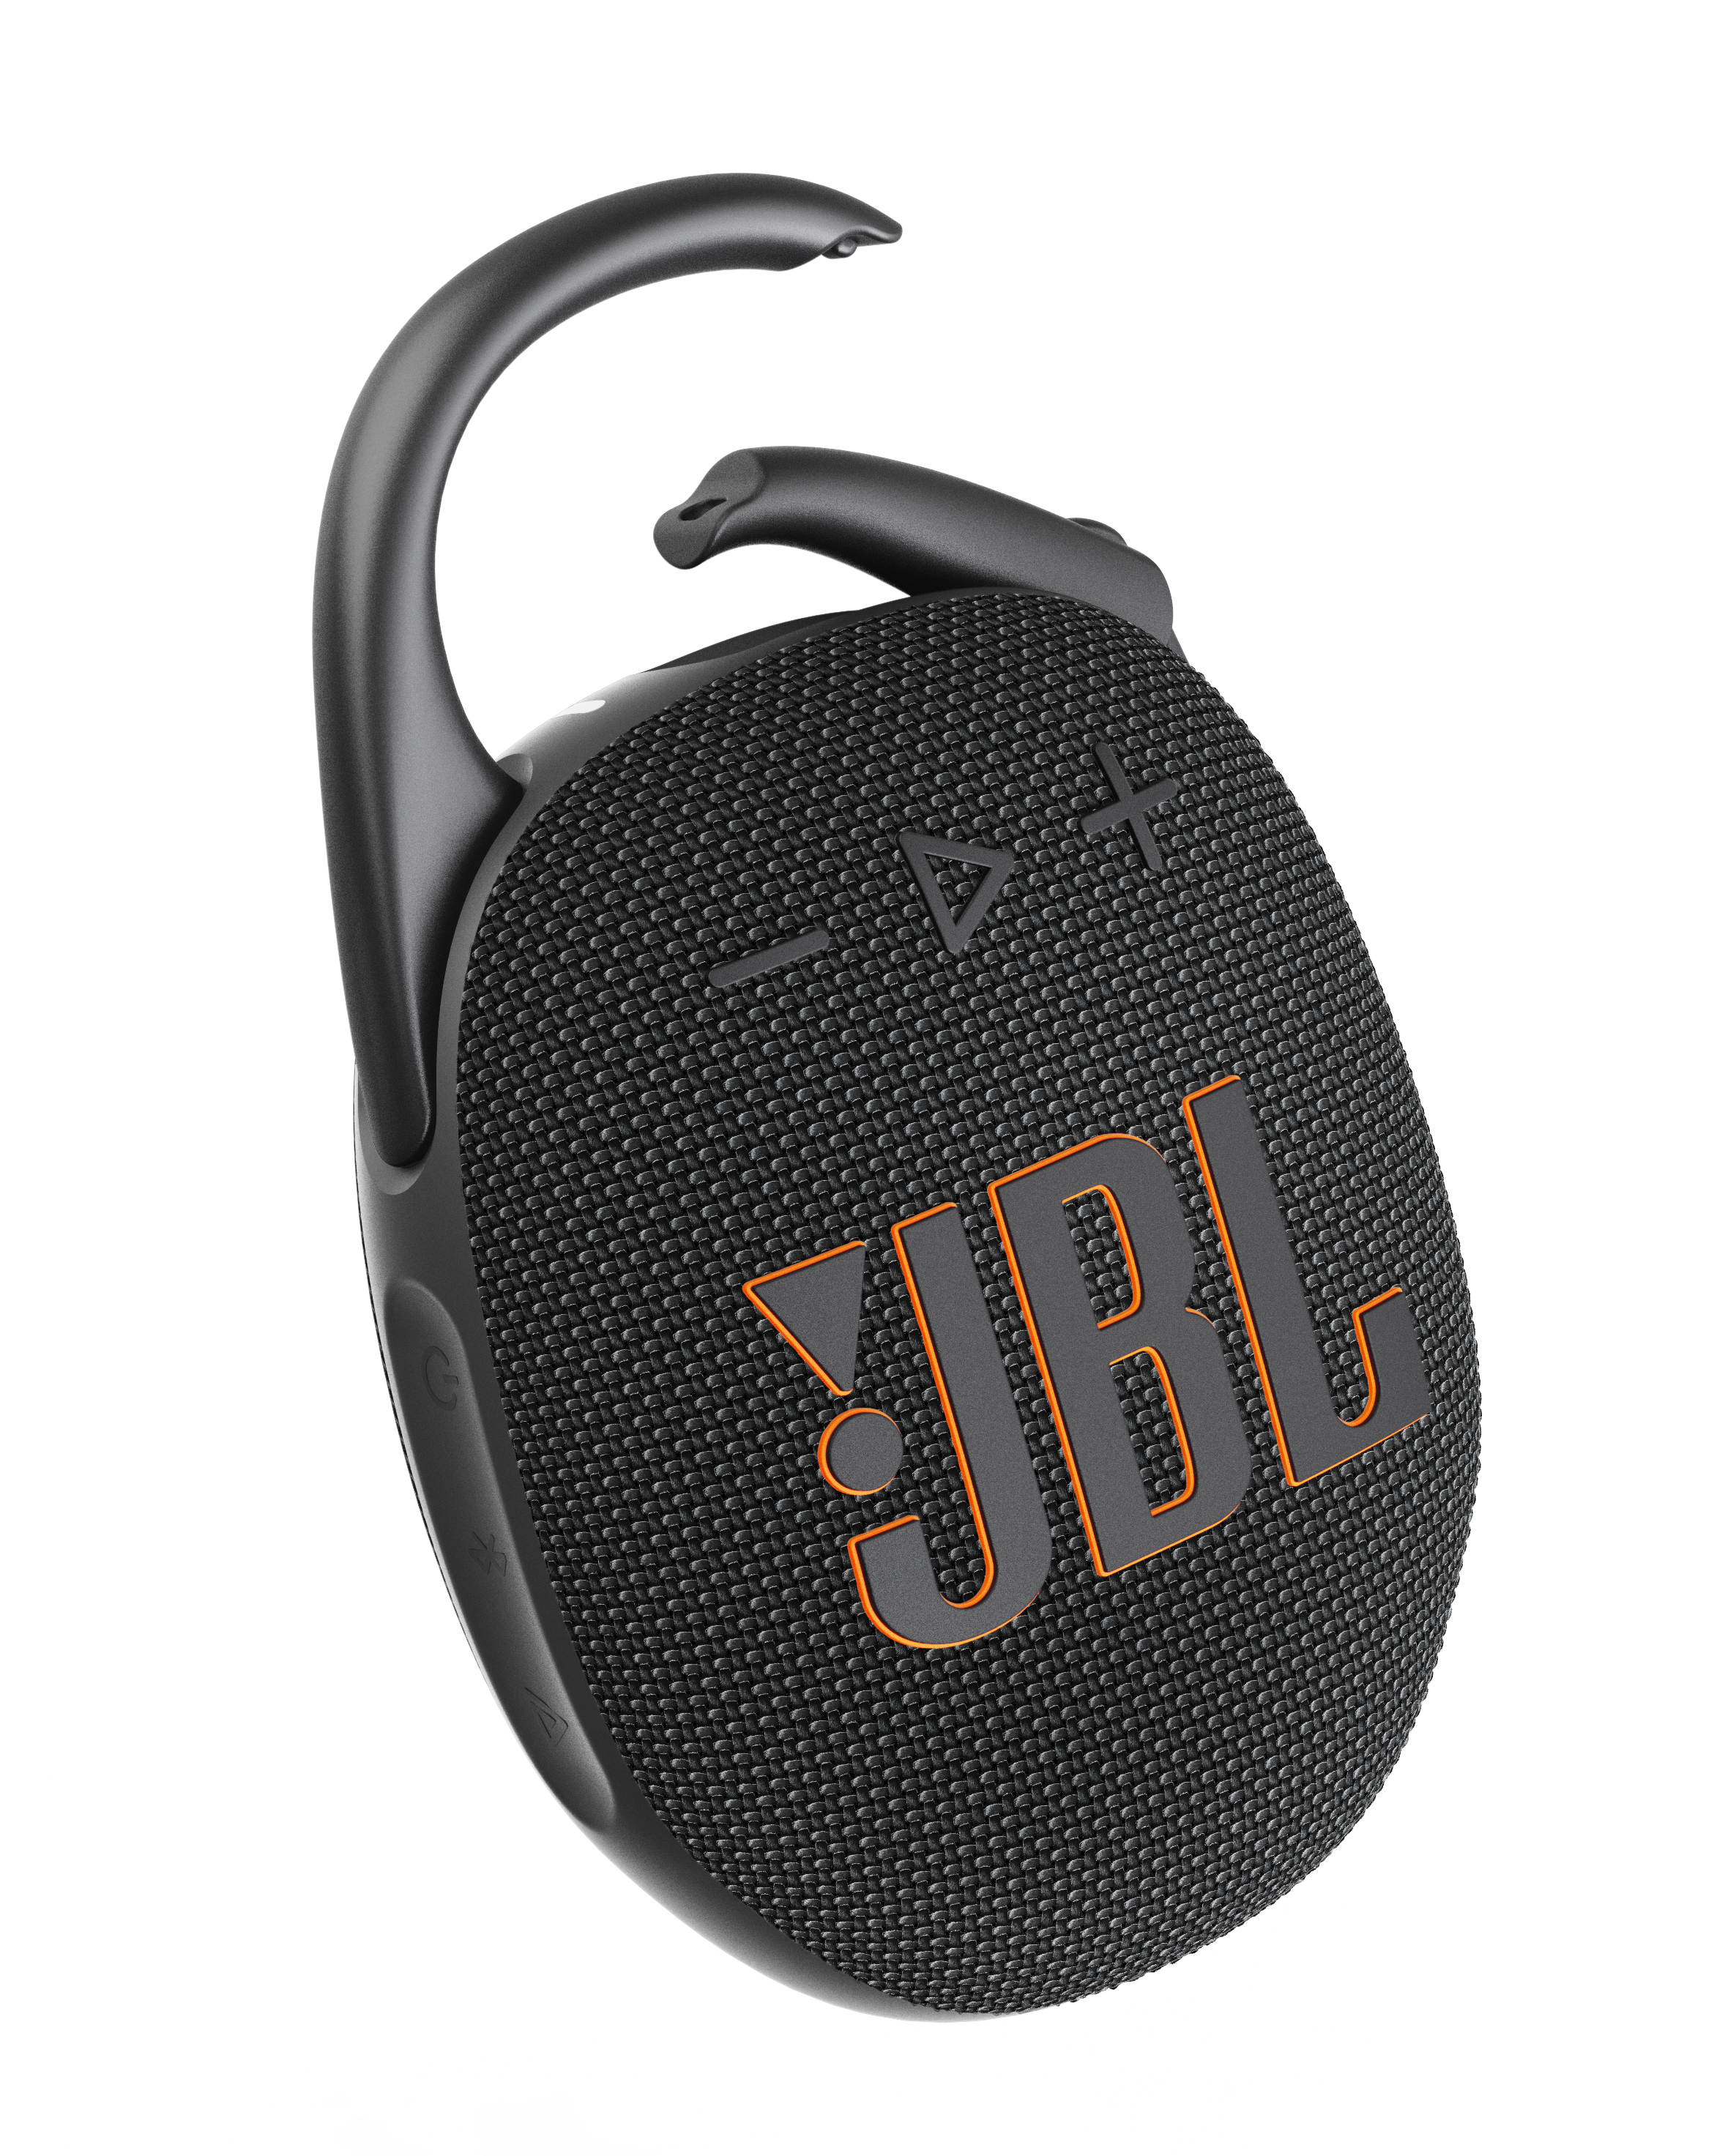 JBL reveals new portable and party speakers - SoundGuys